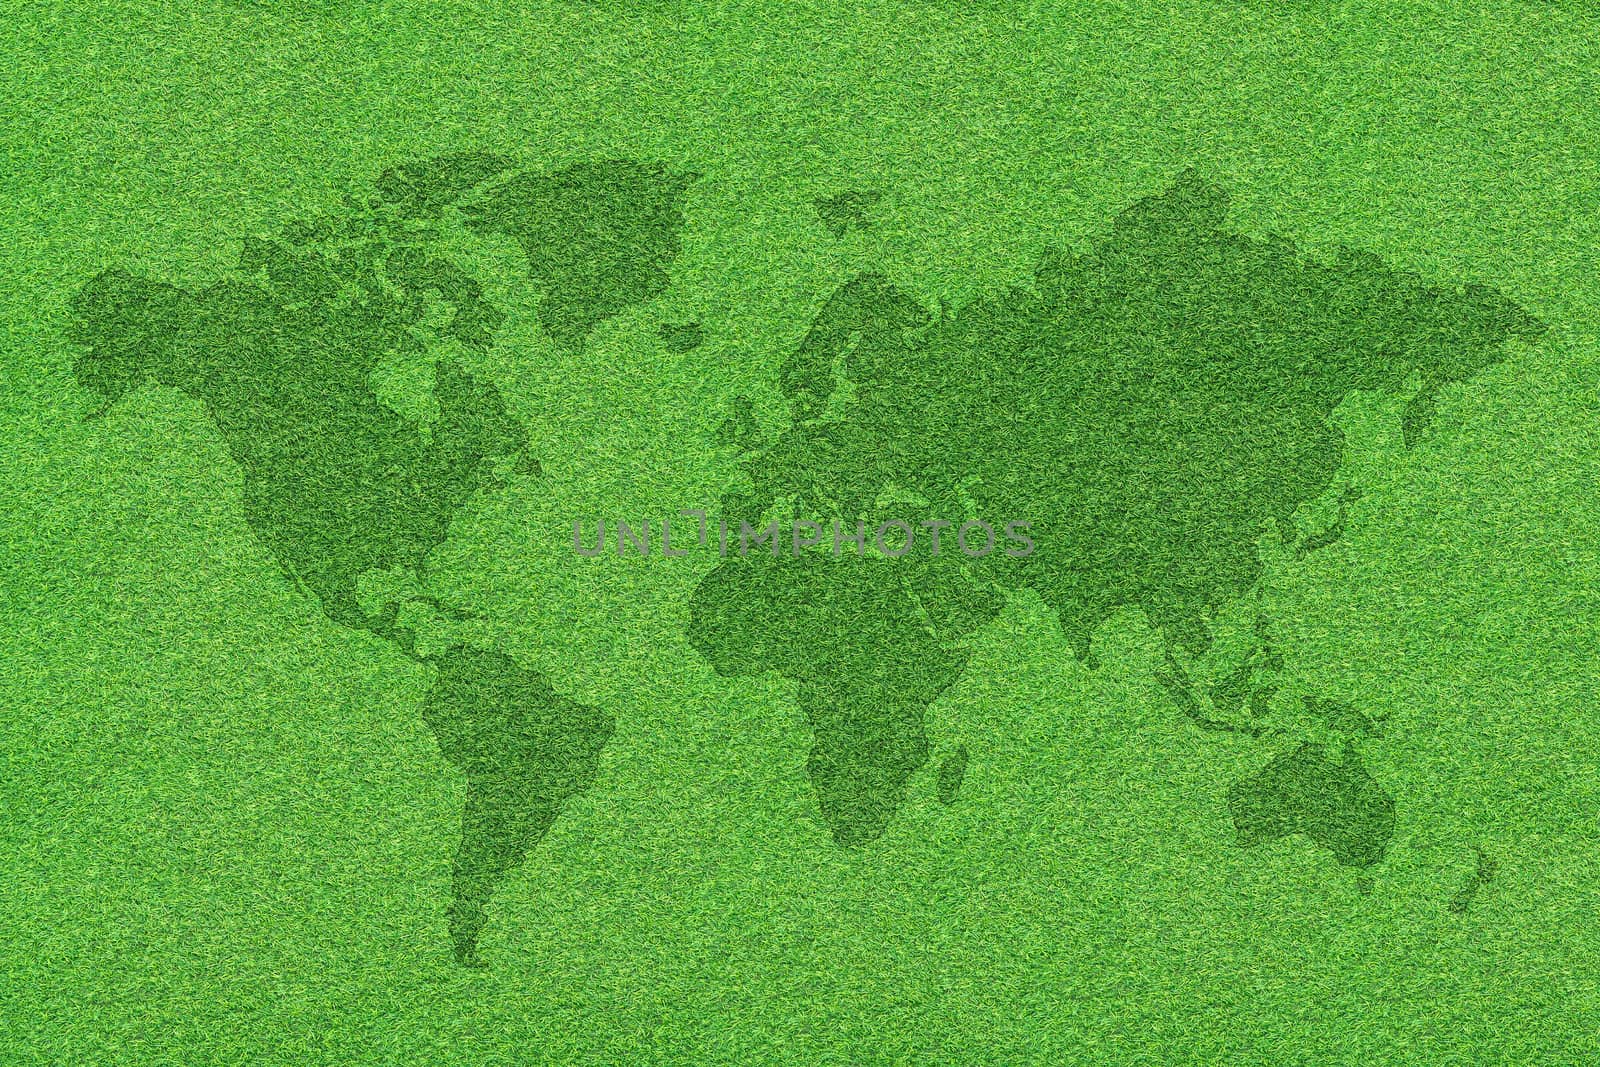 world map on green grass by antpkr